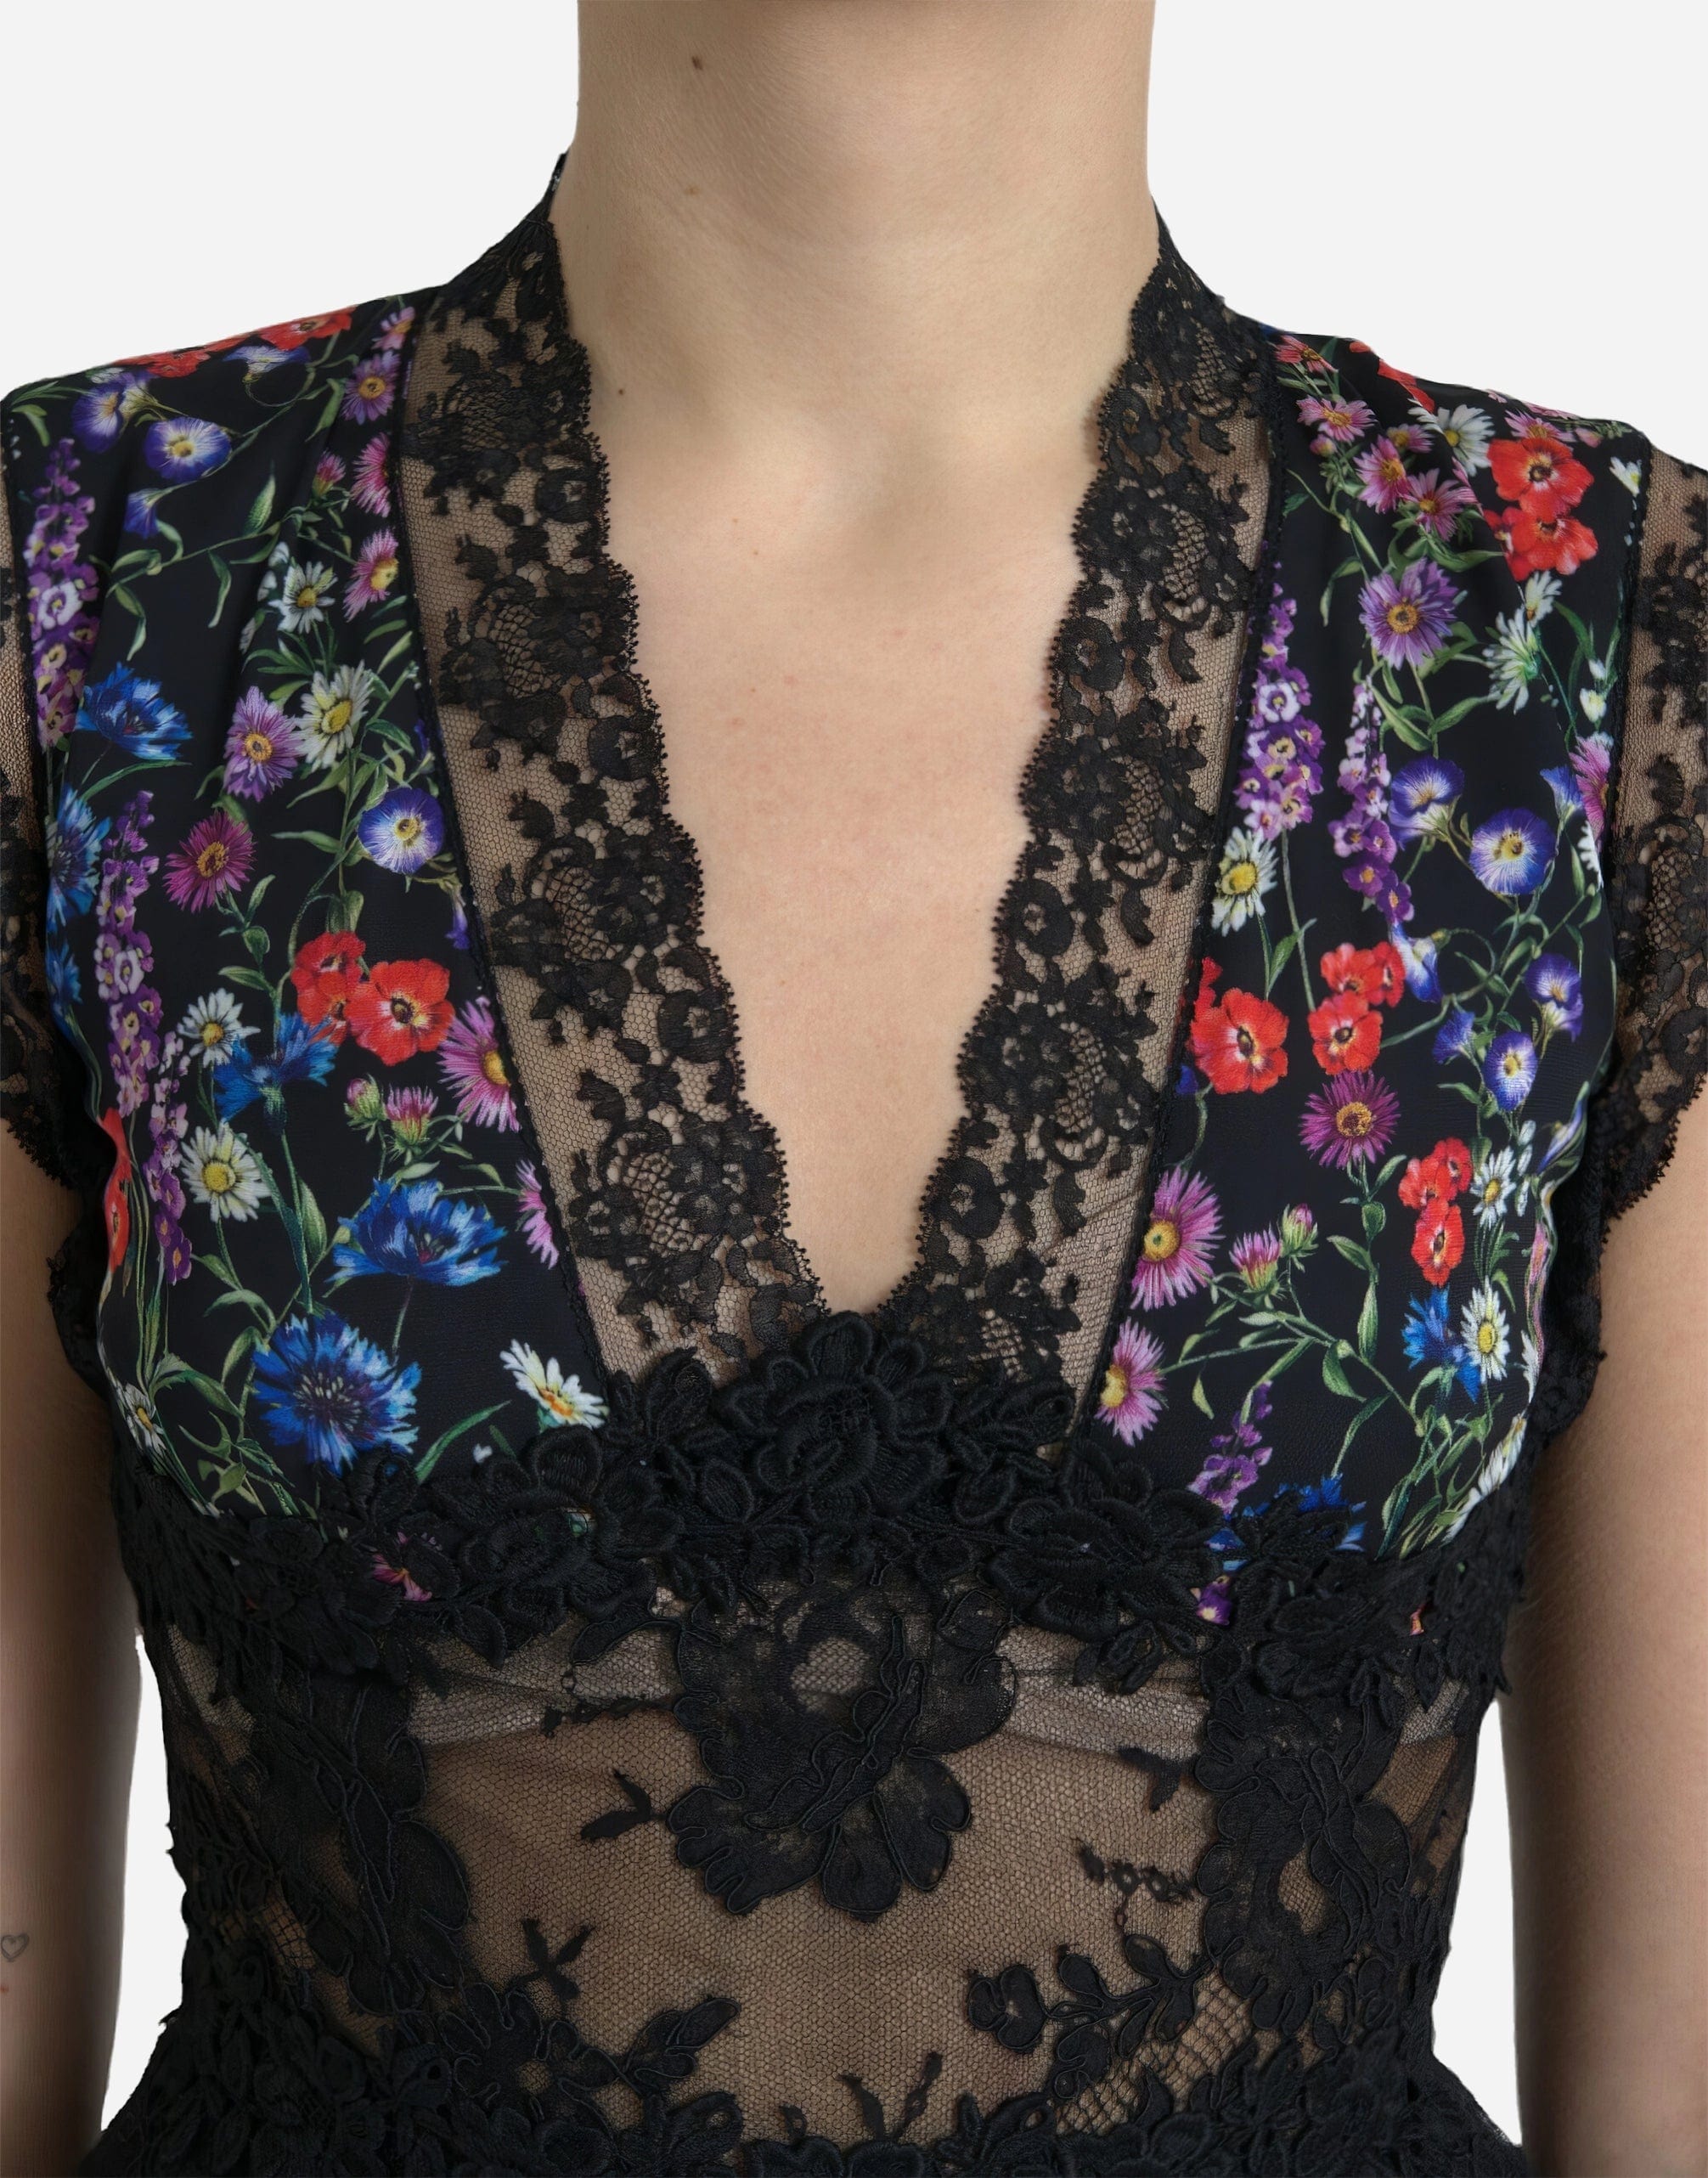 Stretch Lace With Floral Print Dress